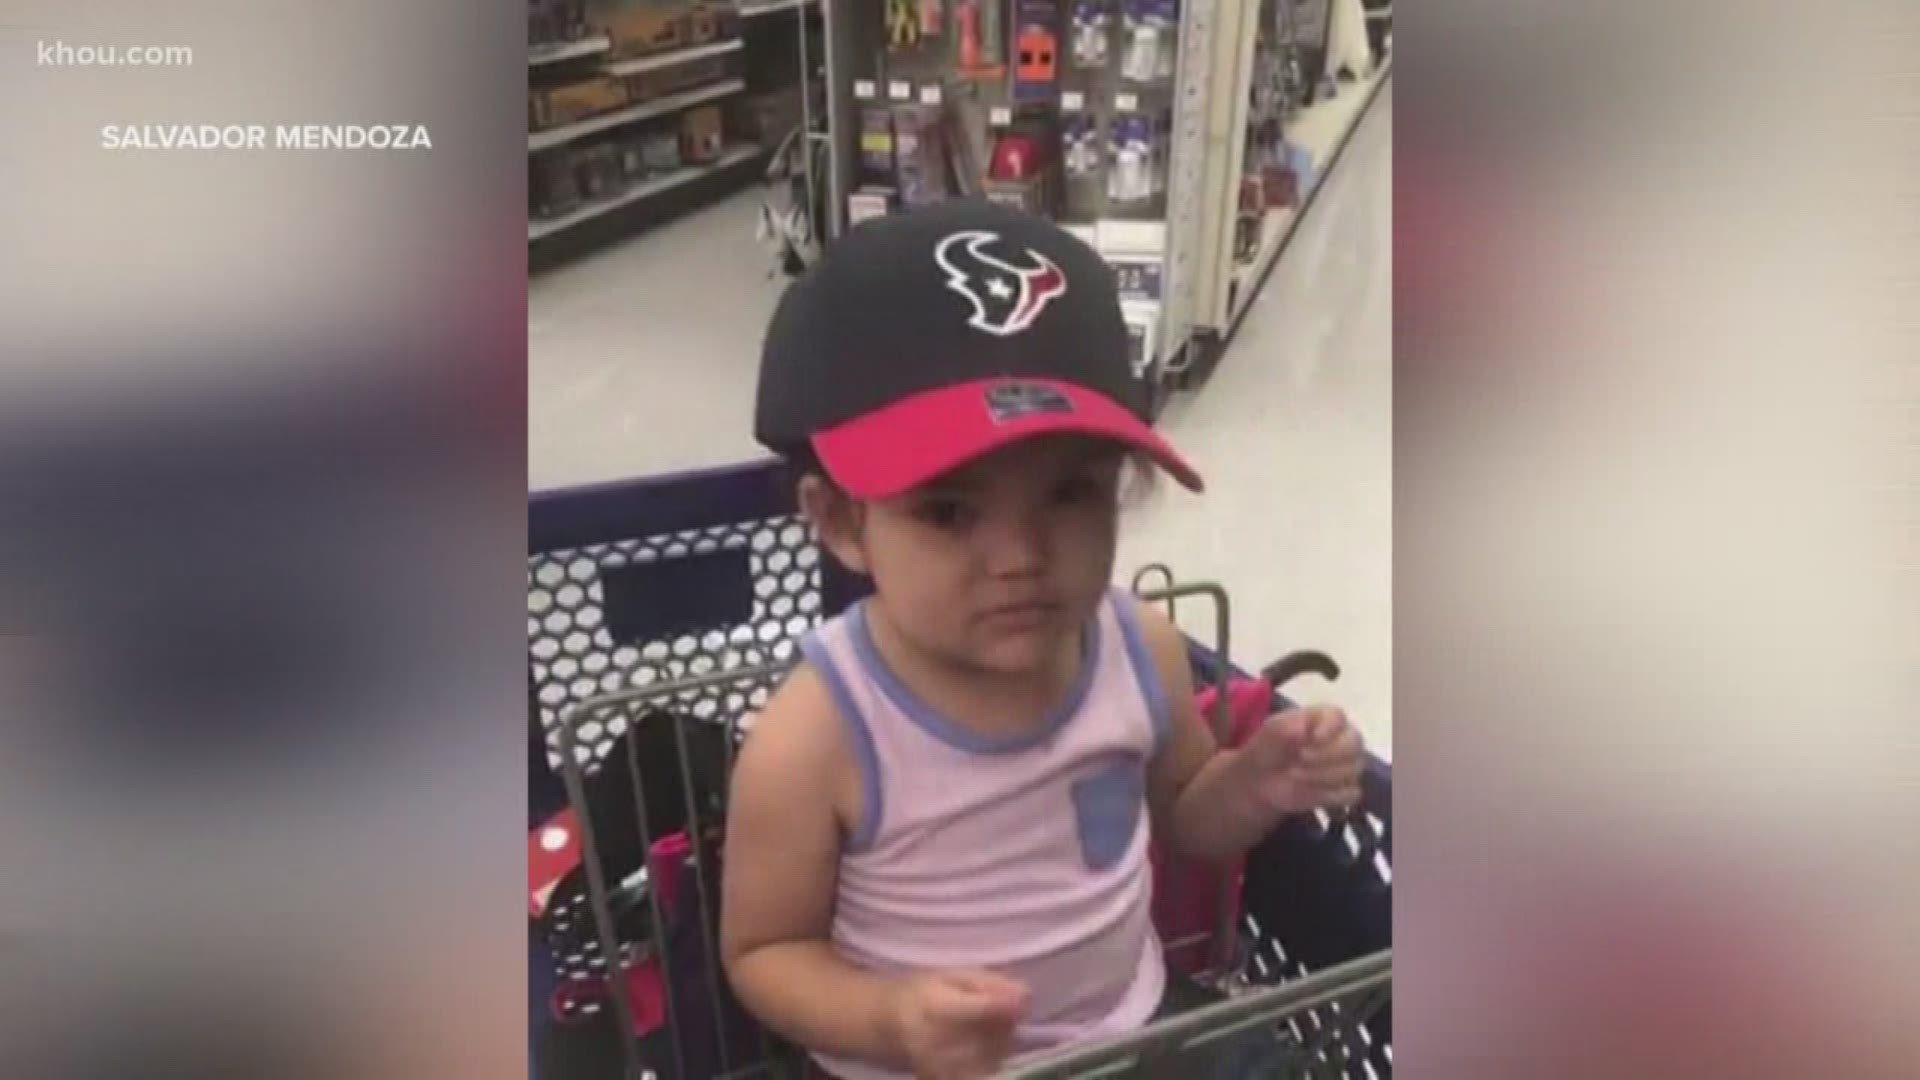 Instilling sports fandom starts at a young age, and Houston Texans fan Olivia Mendoza is proof.